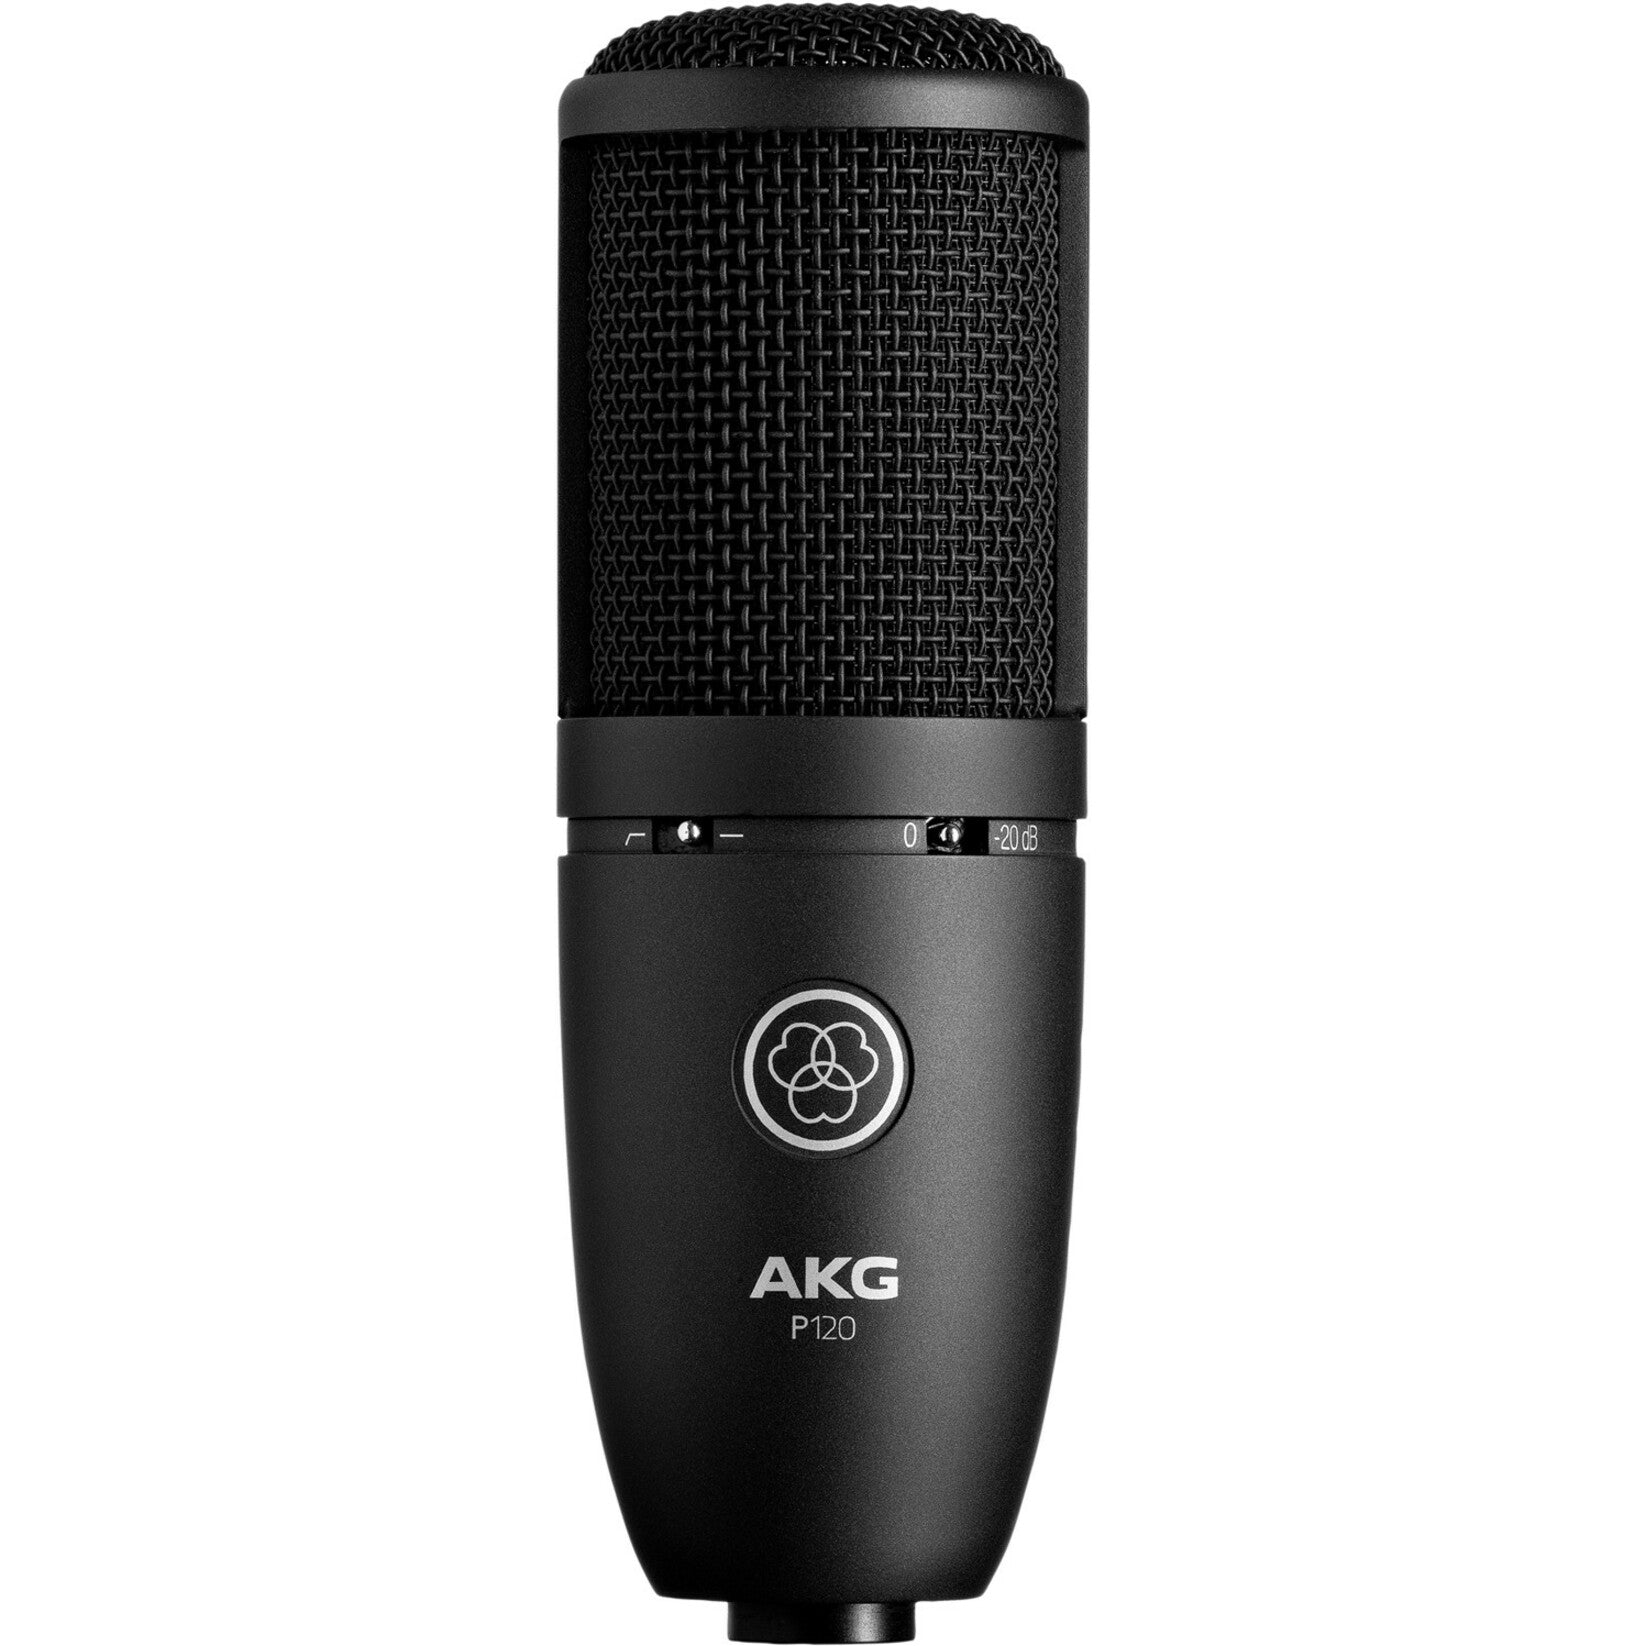 AKG 3101H00400 P120 High-Performance General Purpose Recording Microphone, Wired Condenser Microphone